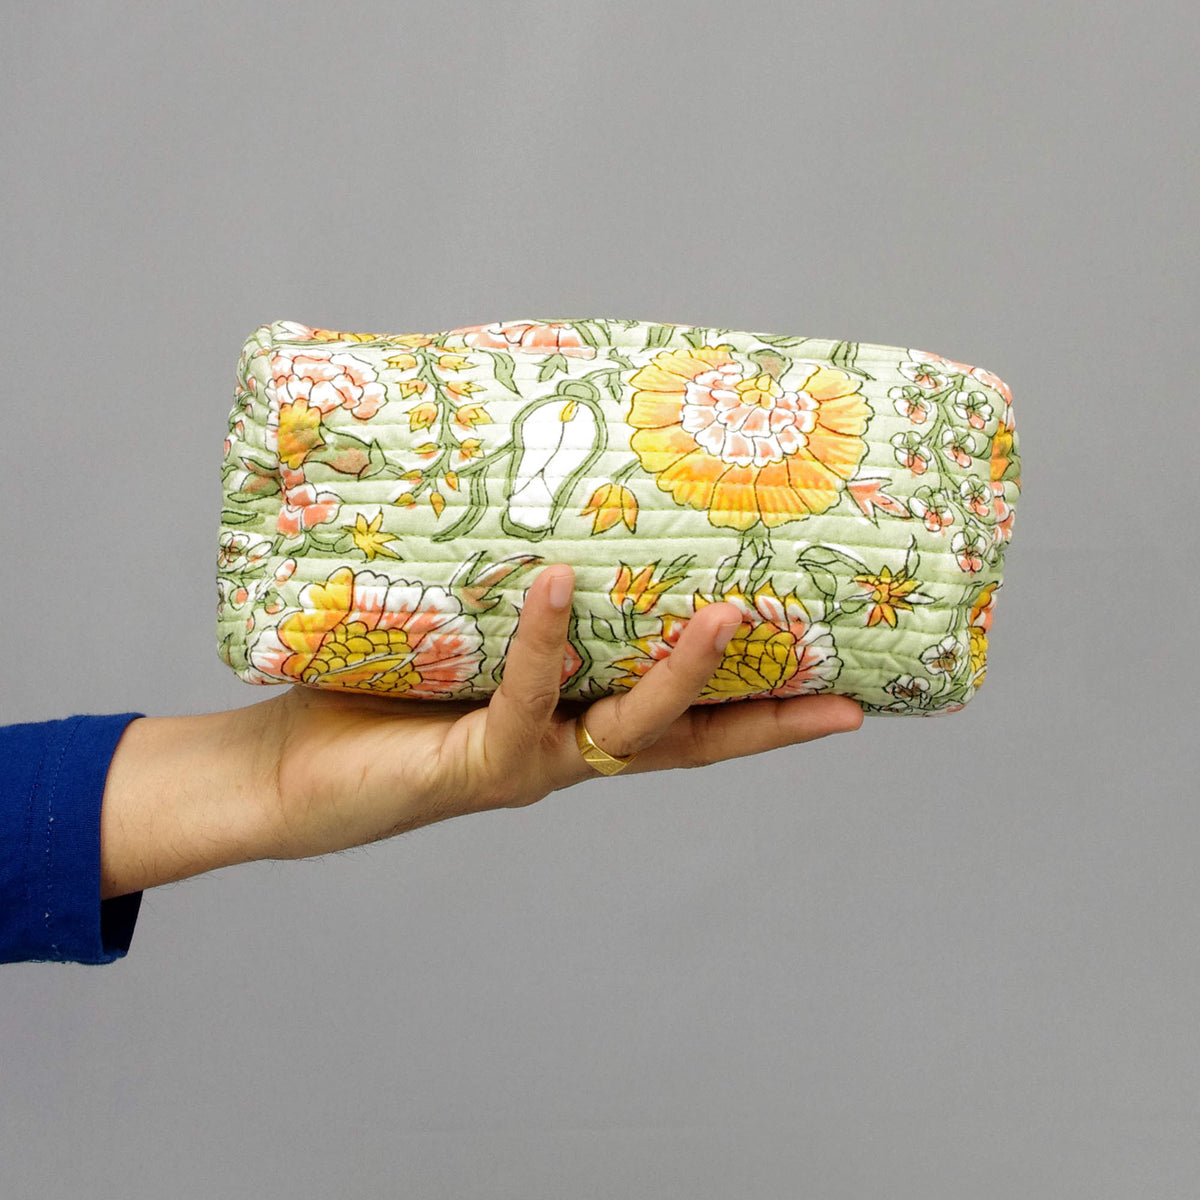 Block Print Makeup Pouch or Pencil Case- Marigold On White